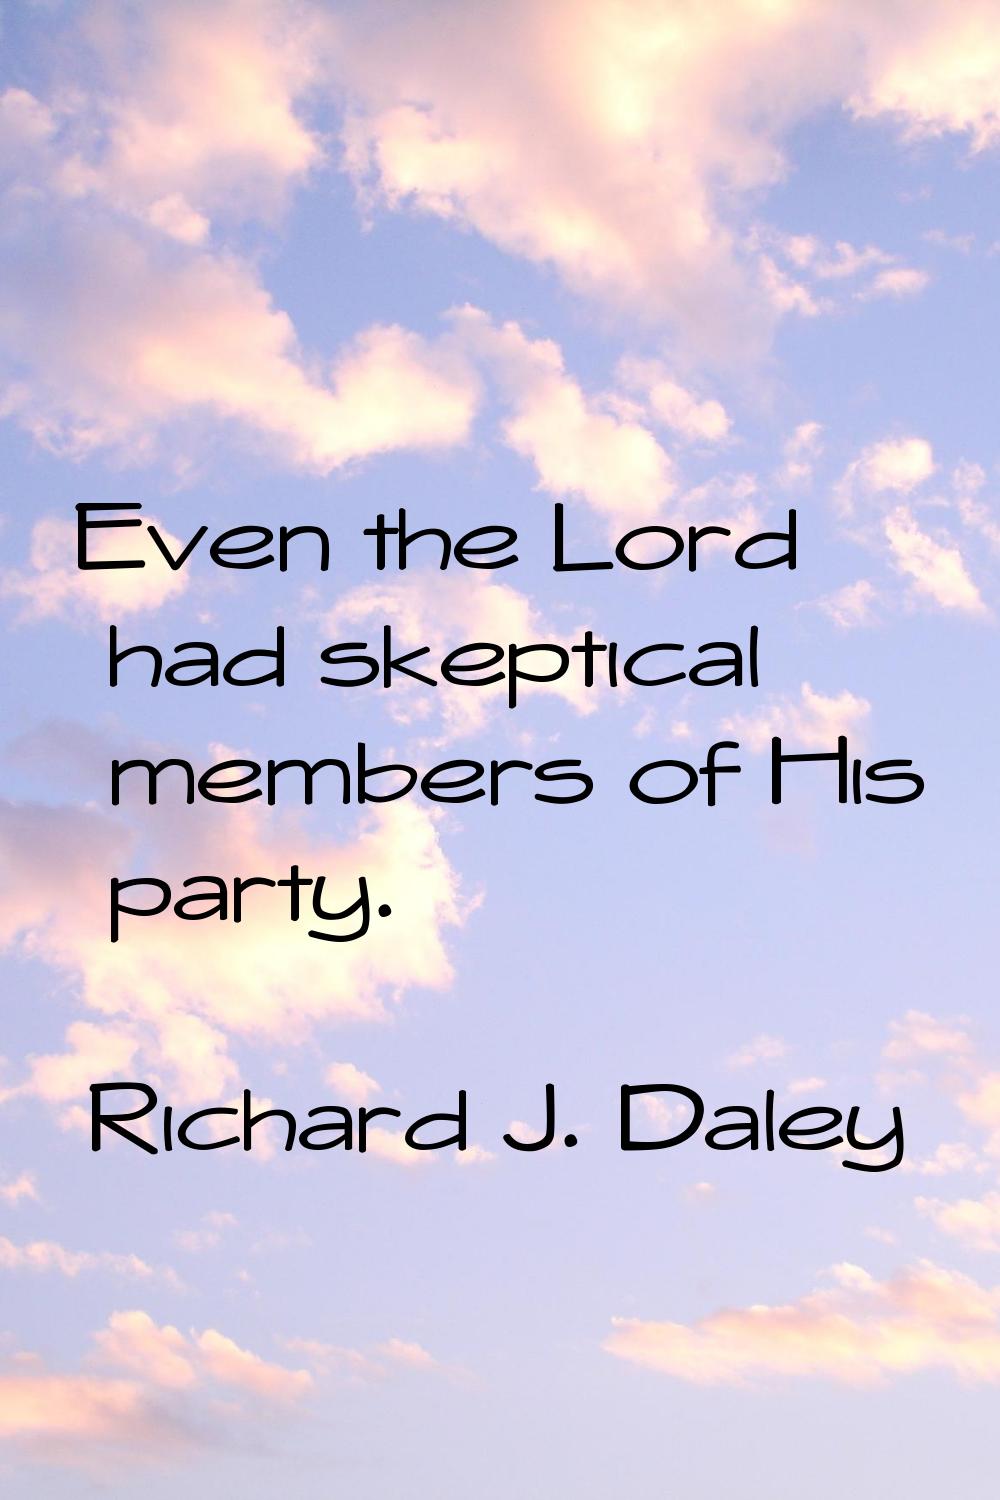 Even the Lord had skeptical members of His party.